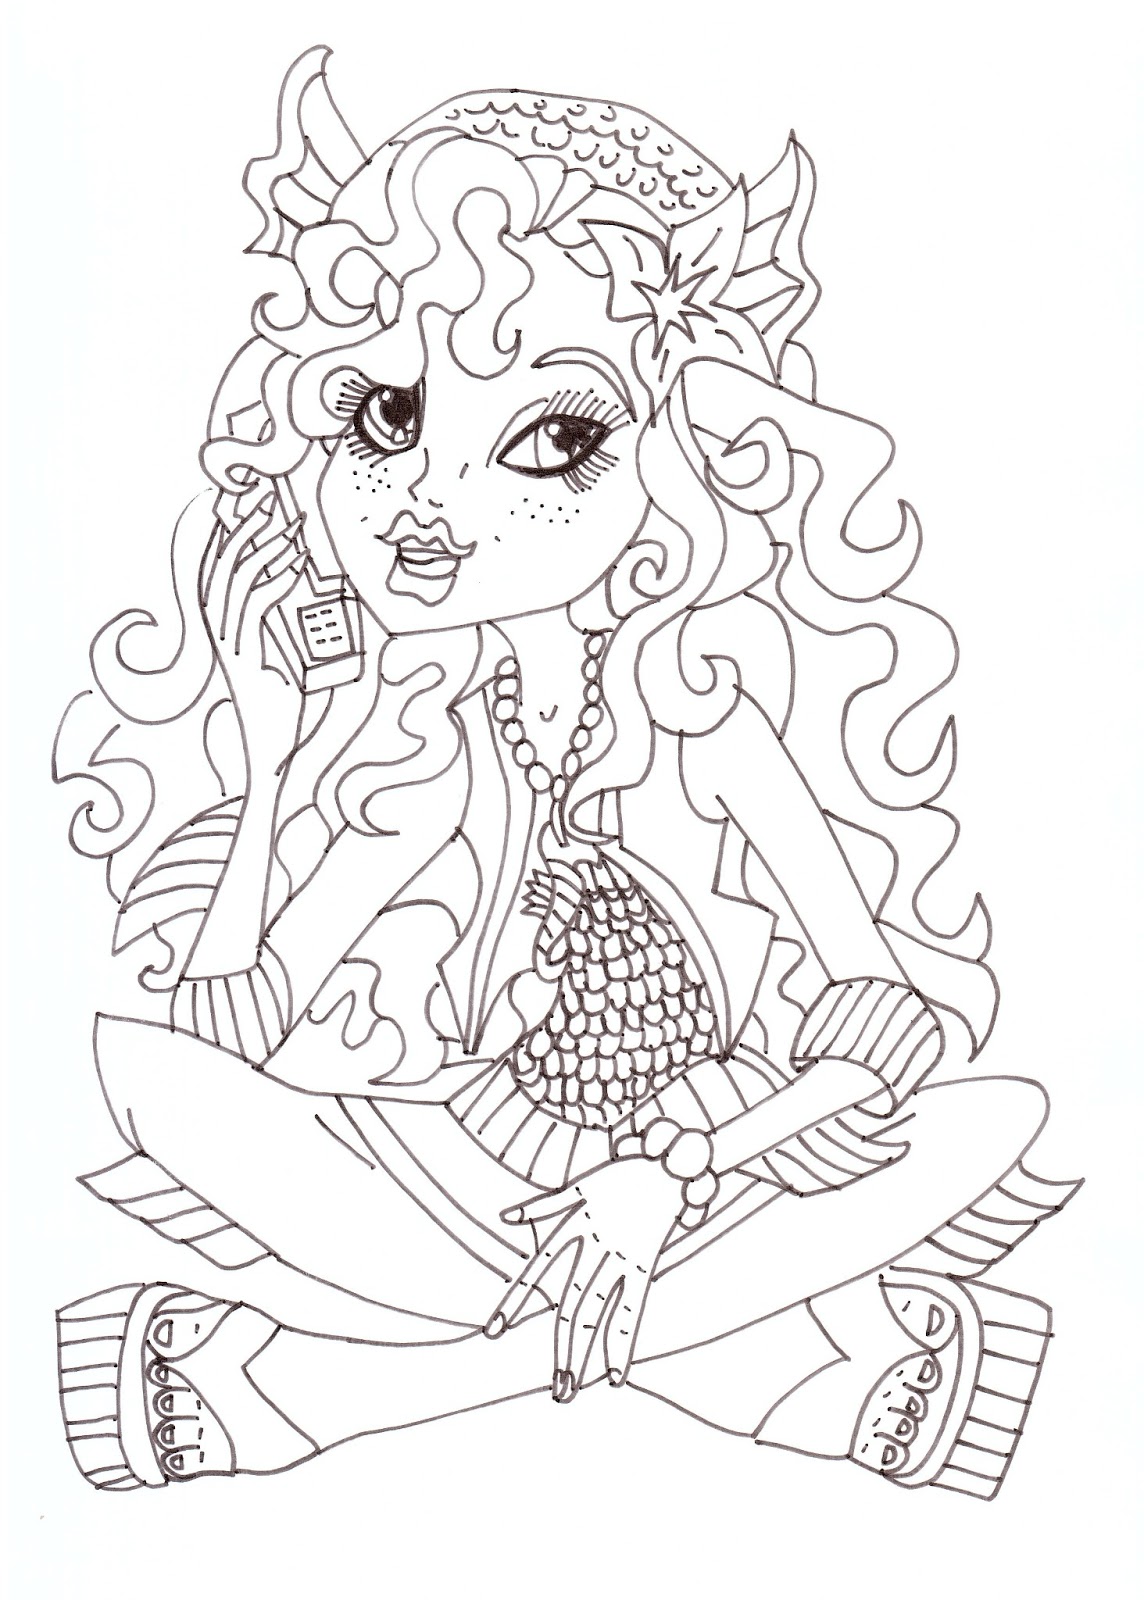 Download Free Printable Monster High Coloring Pages: Lagoona Blue ...